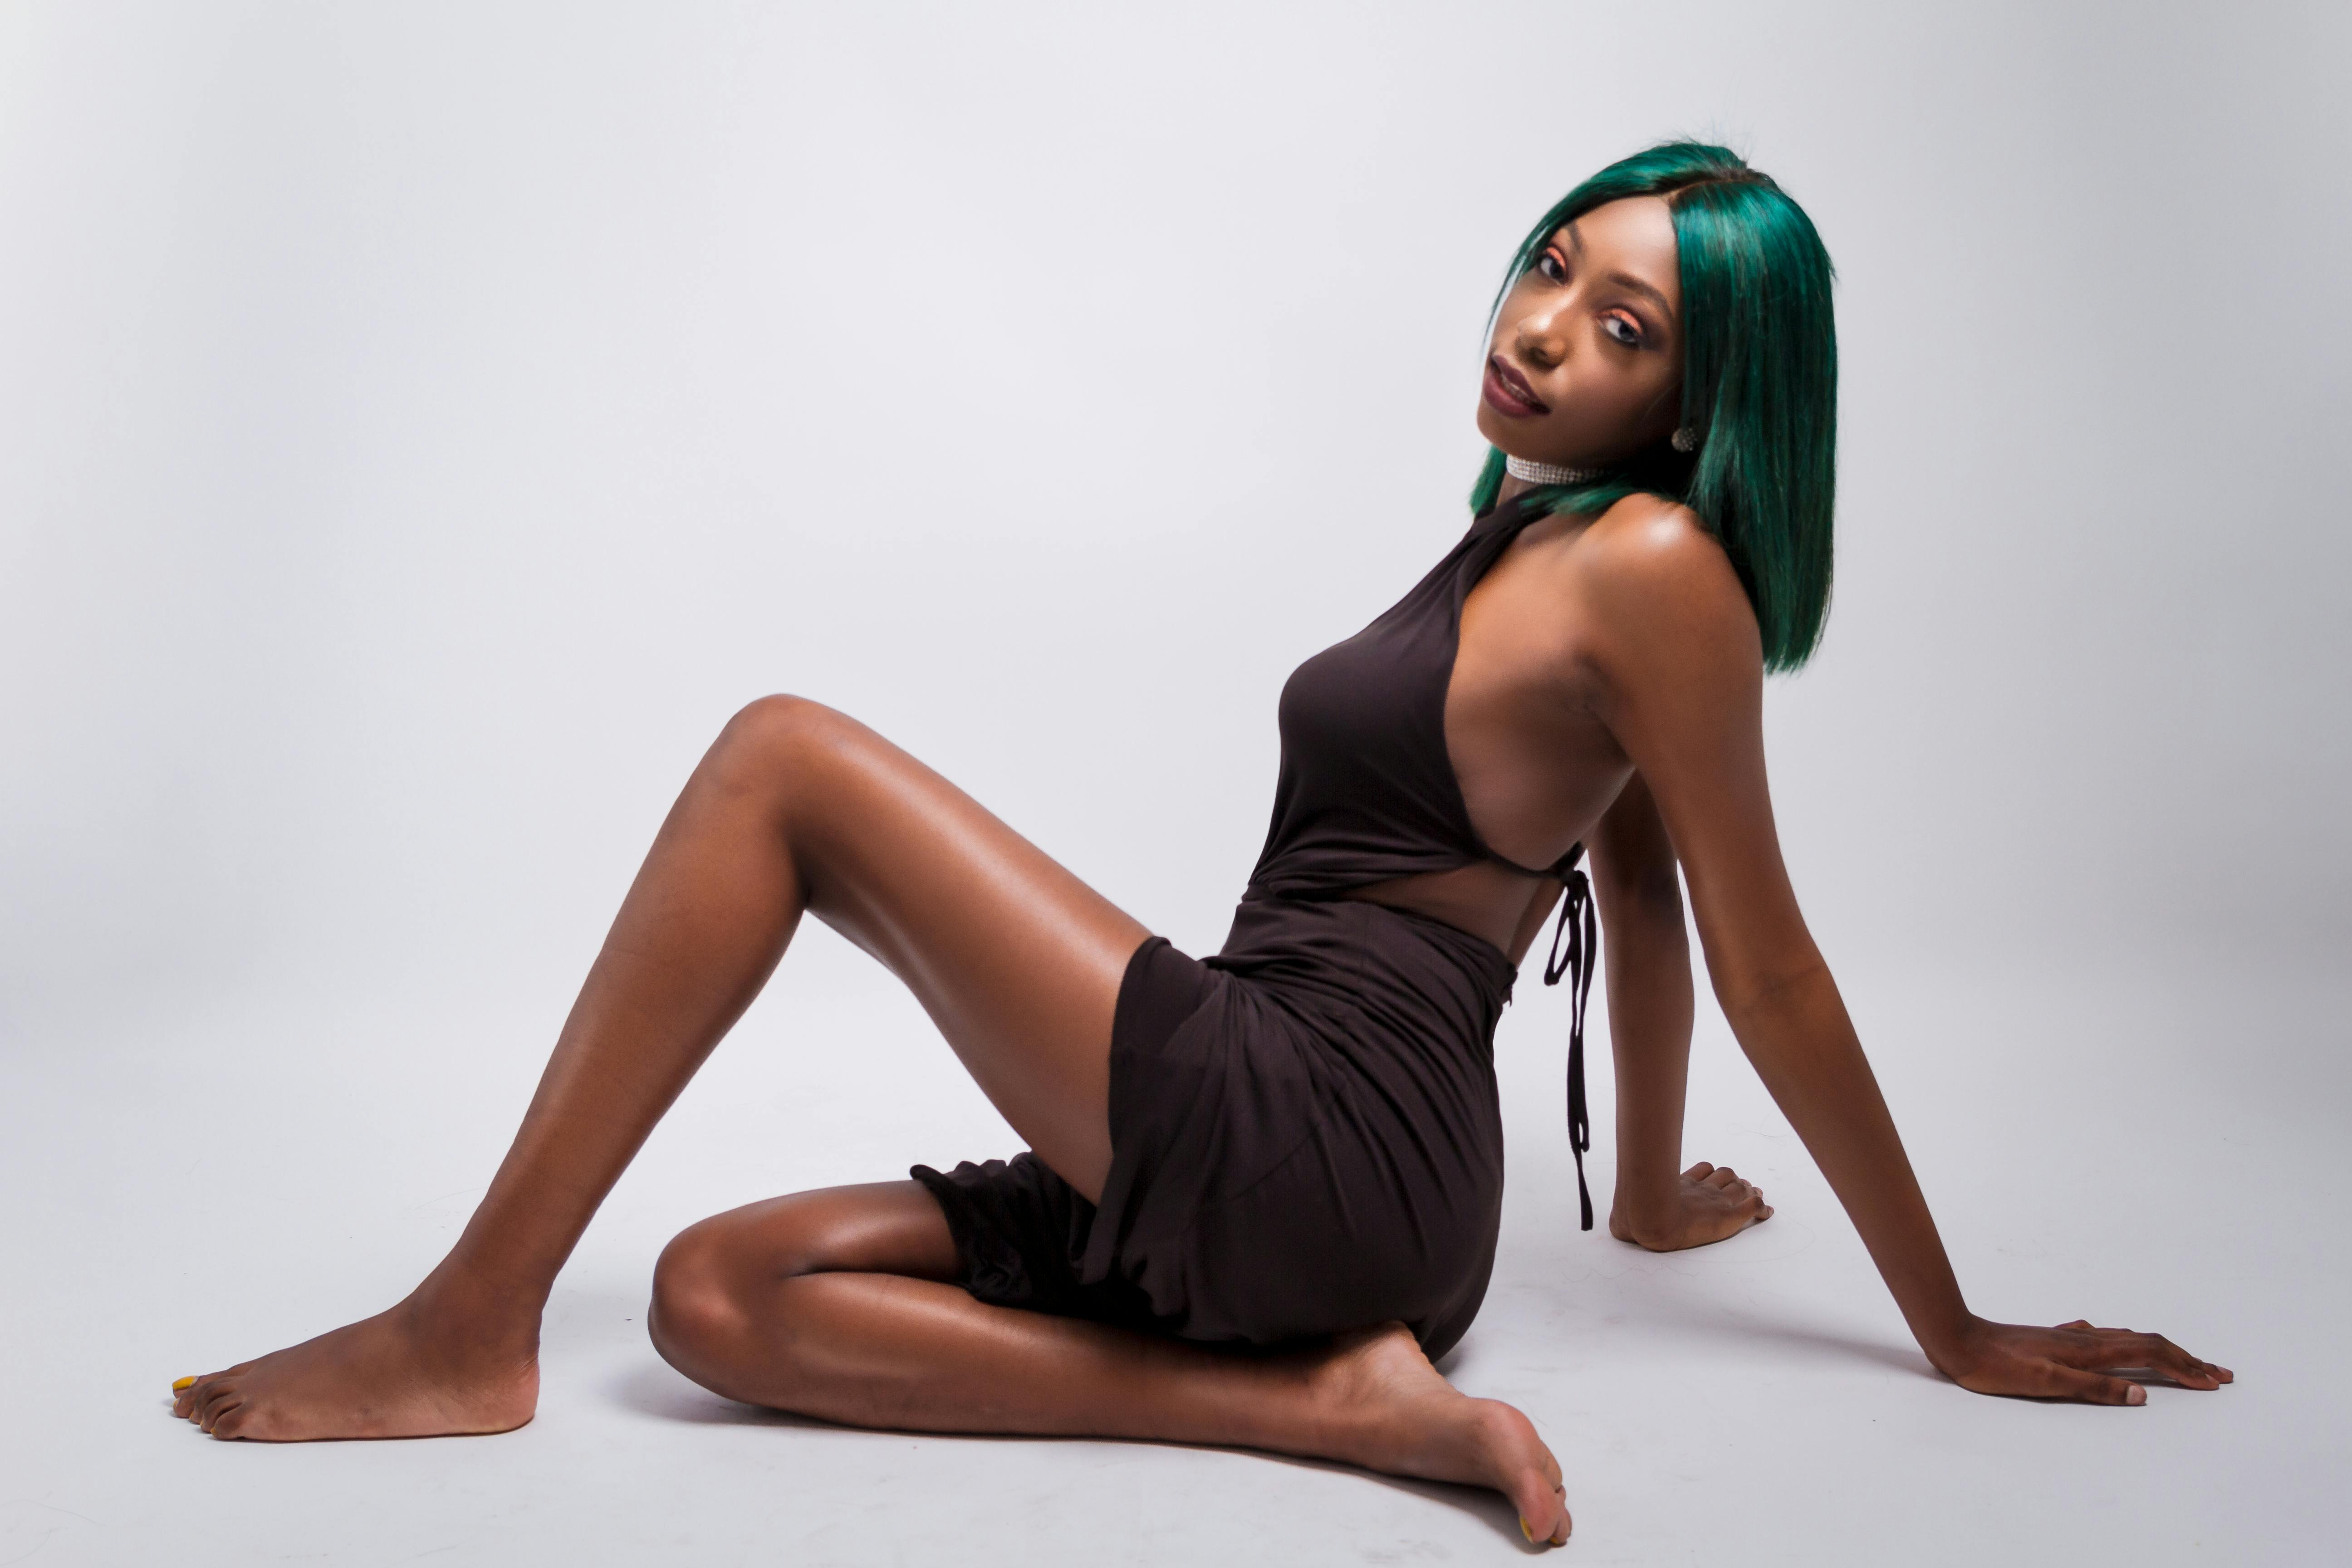 photograph of a woman with green hair posing